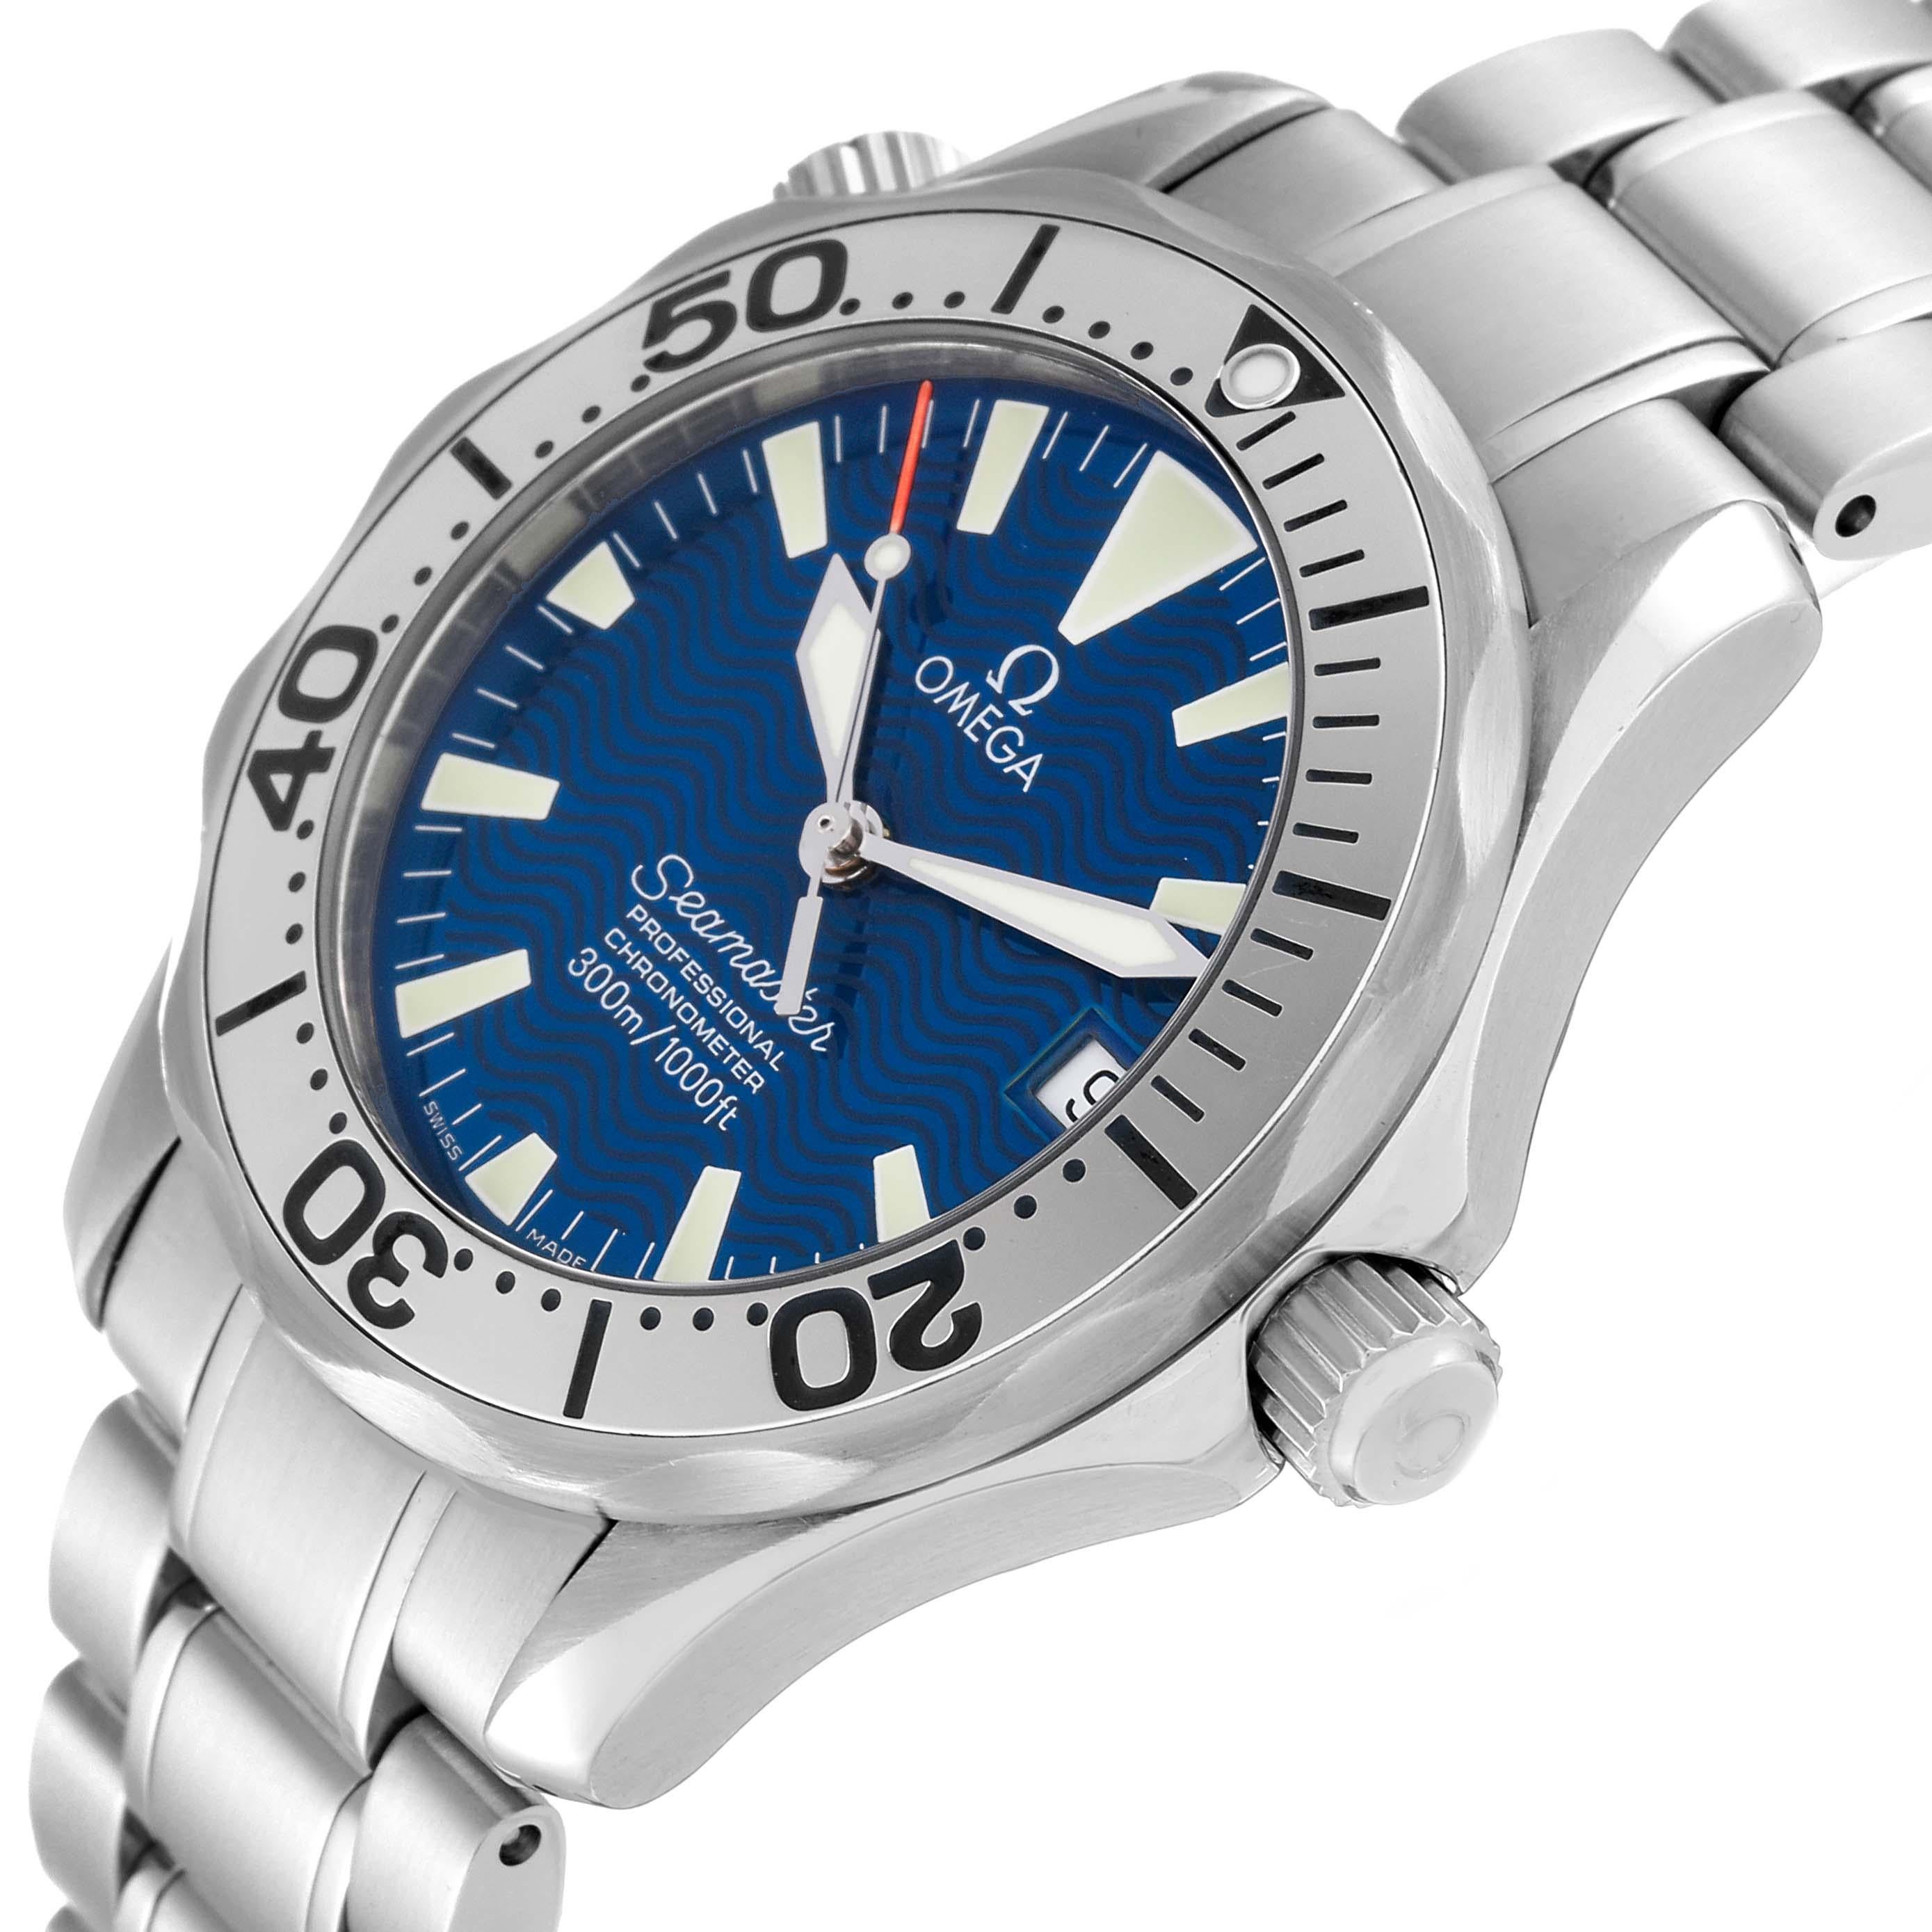 Omega Seamaster 300M Blue Dial Steel Mens Watch 2253.80.00 4